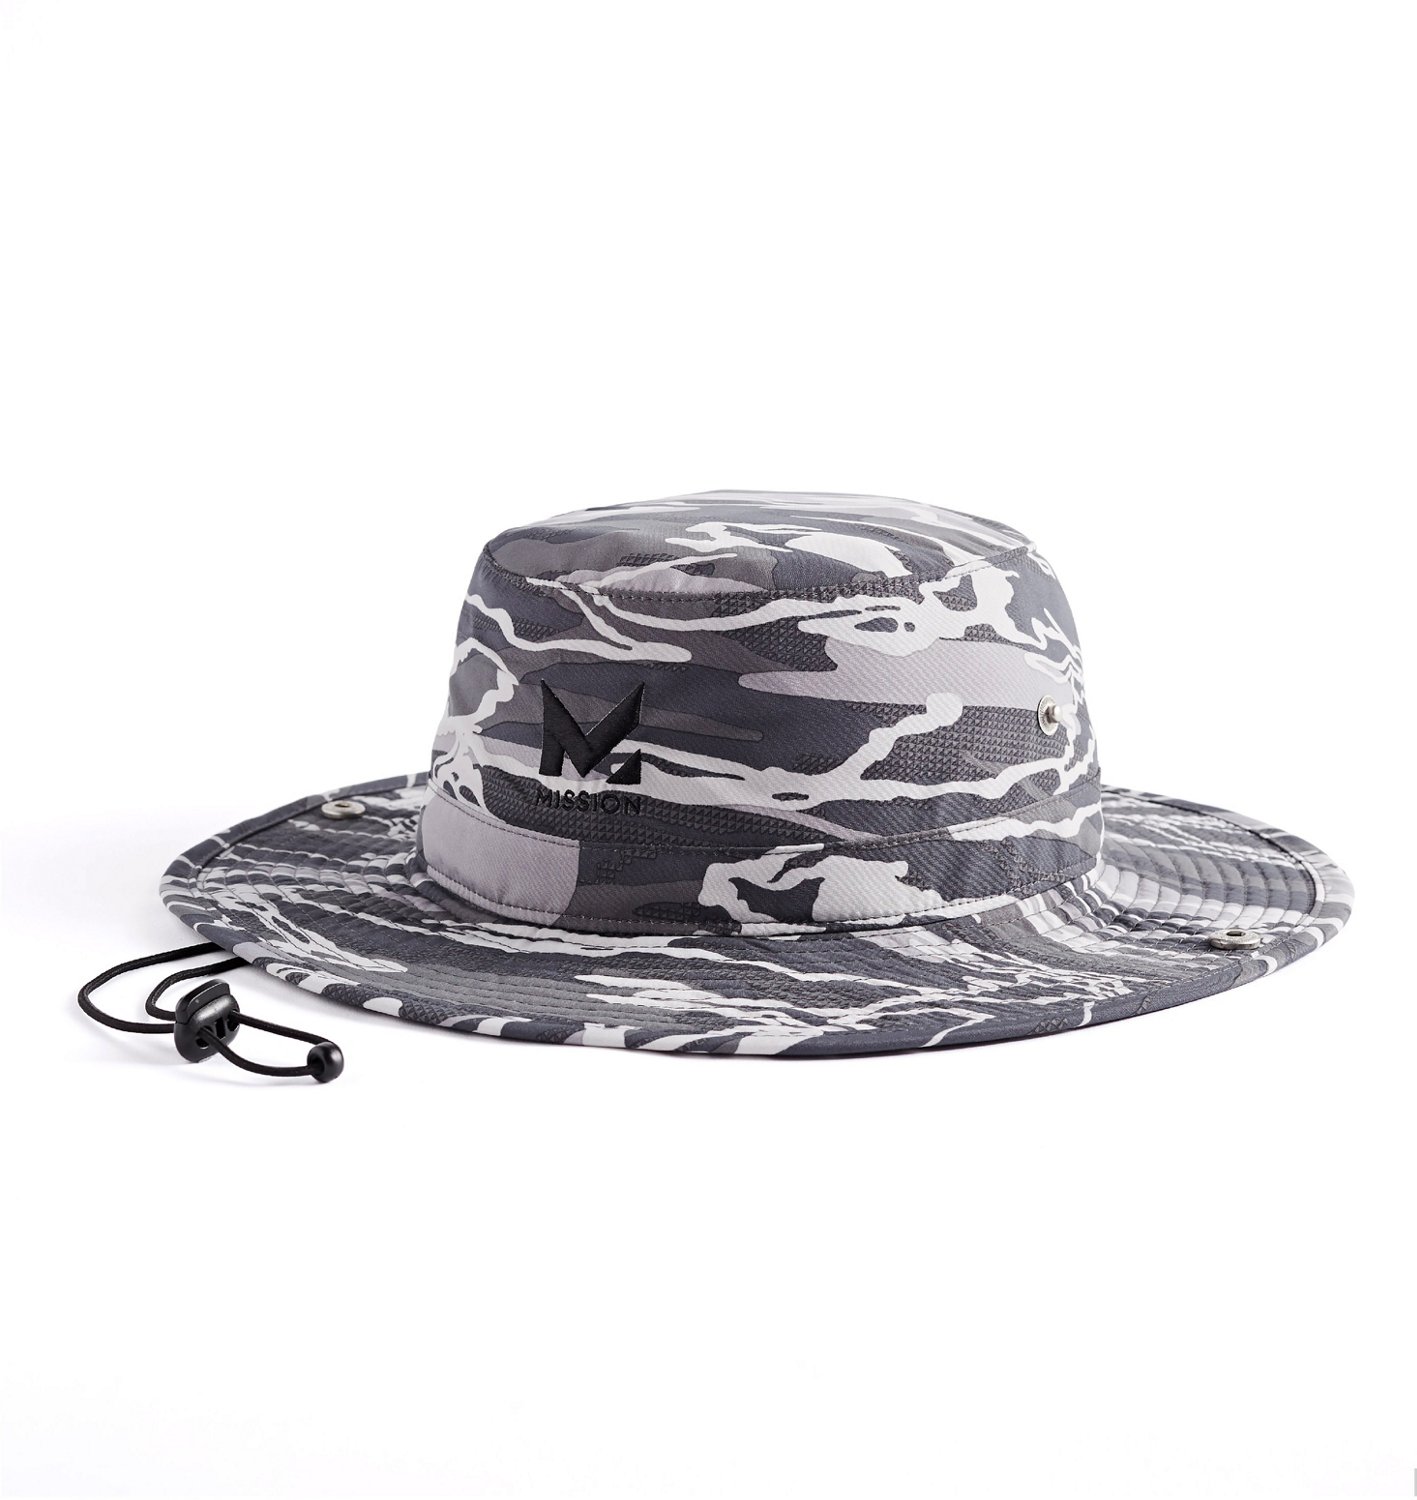 MISSION Adults Instant Cooling Bucket Hat